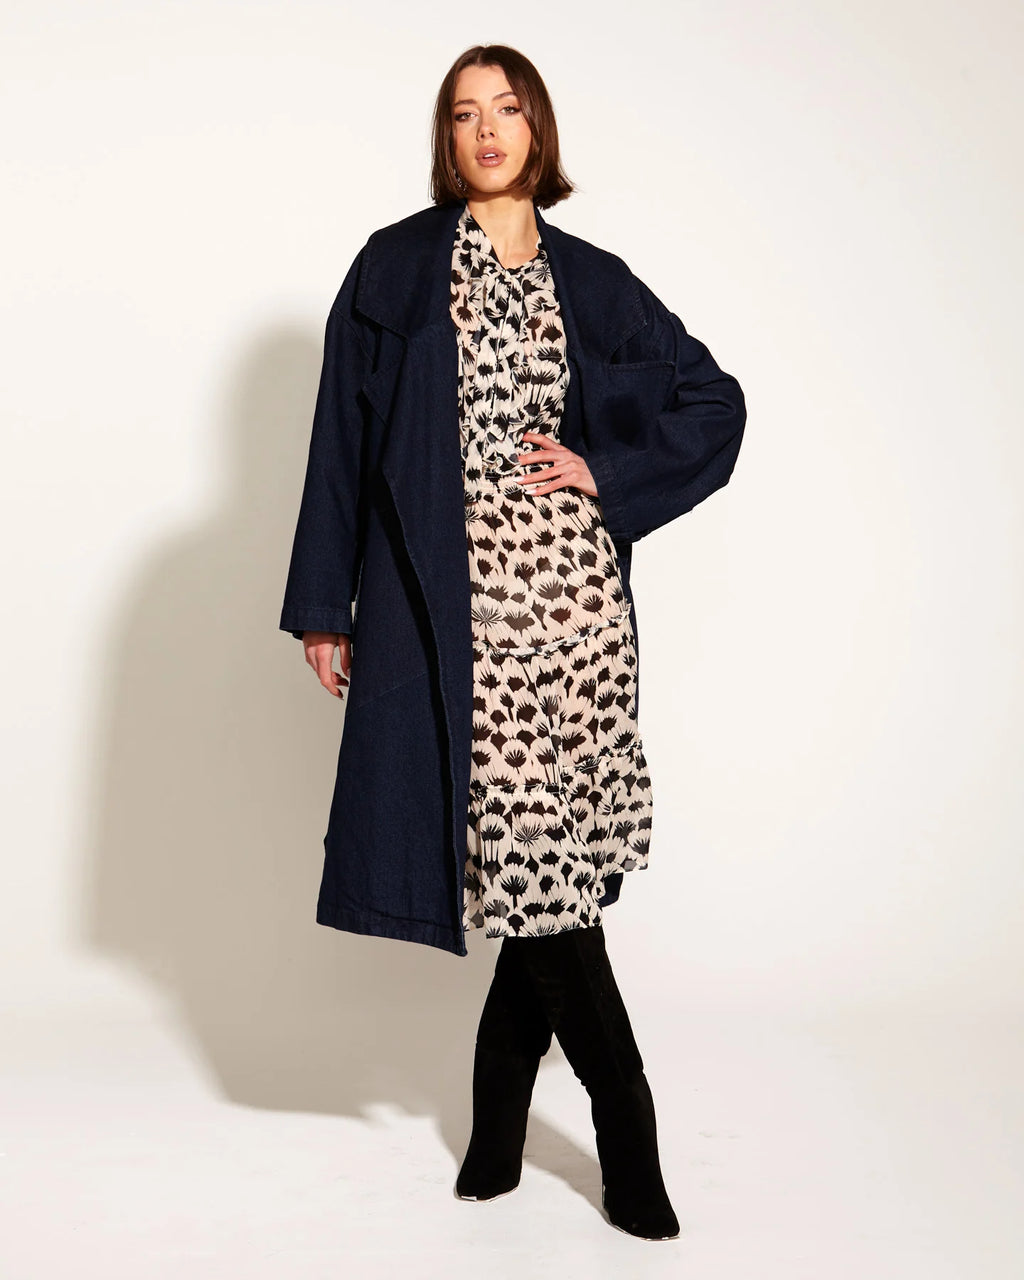 Fate+Becker Night And Day High Collar Oversized Denim Trench Coat - Midnight Blue